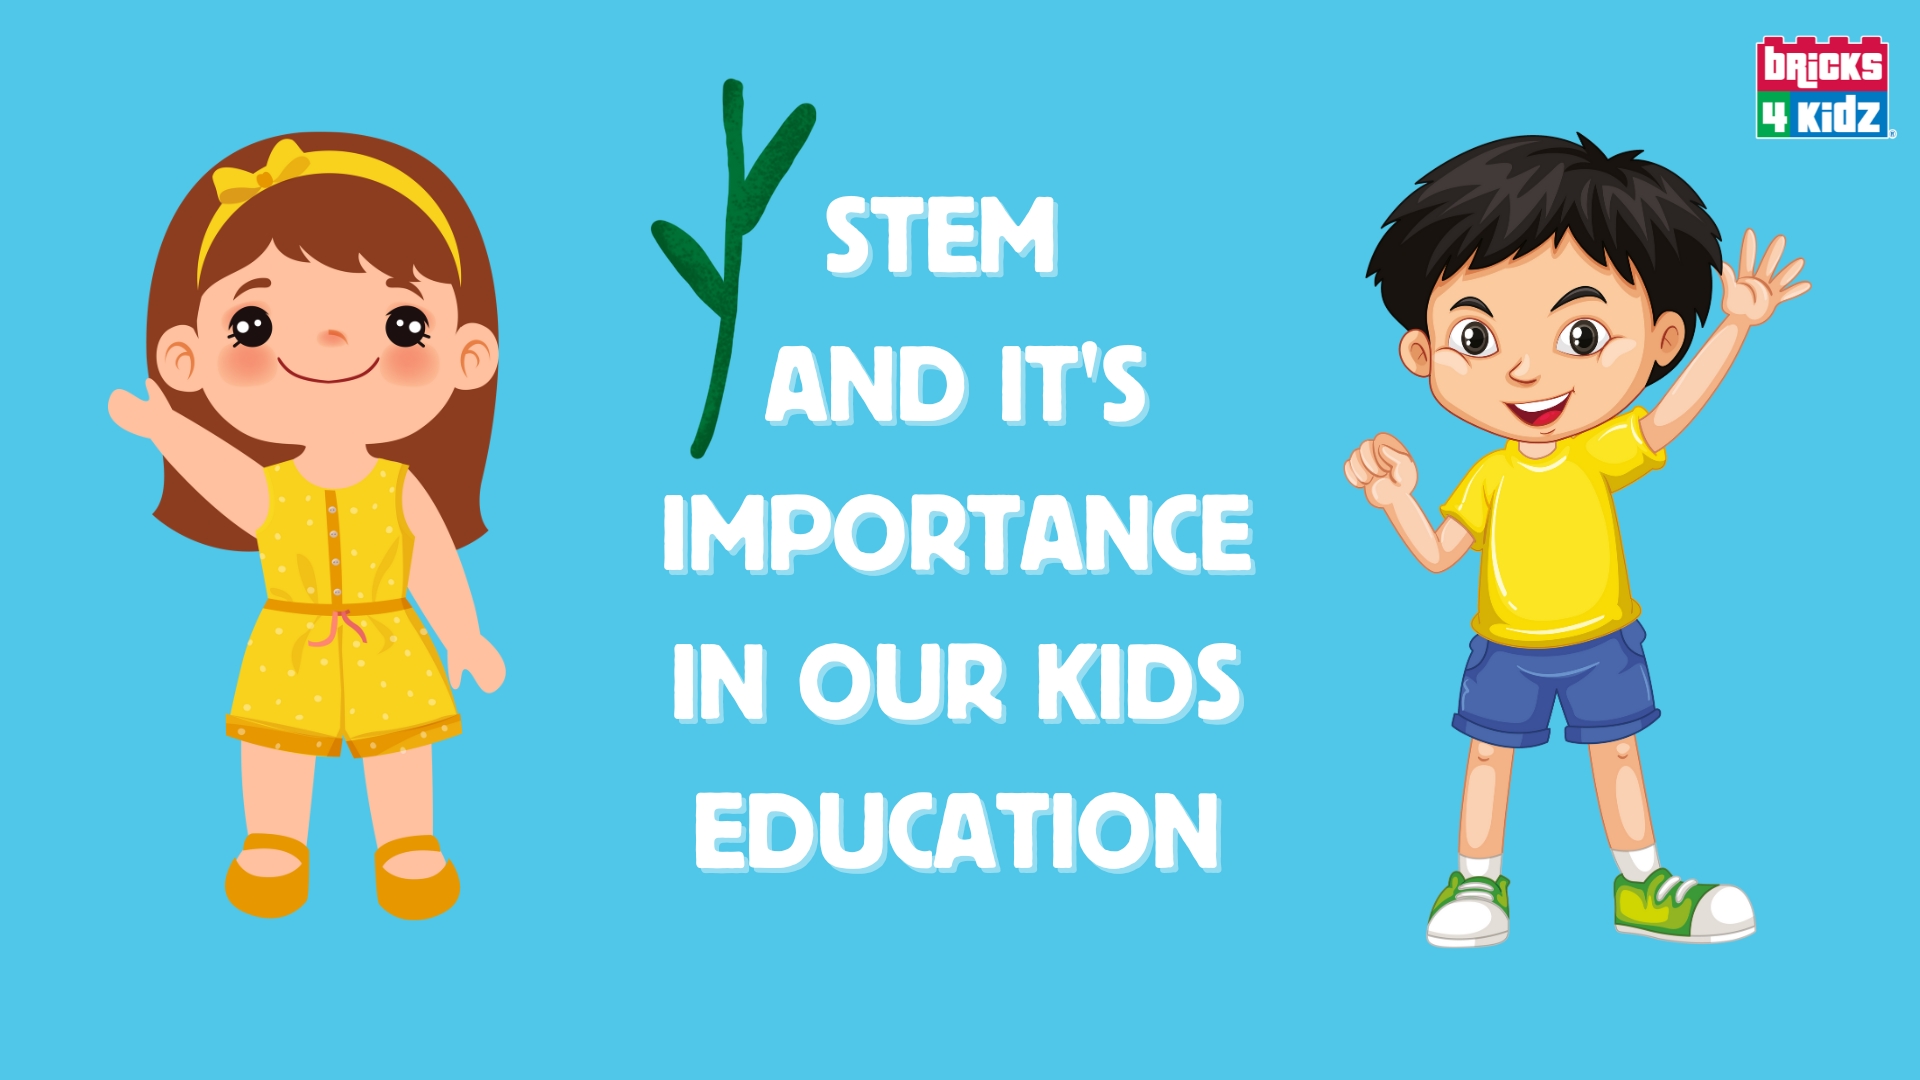 Stem and it's importance in child education